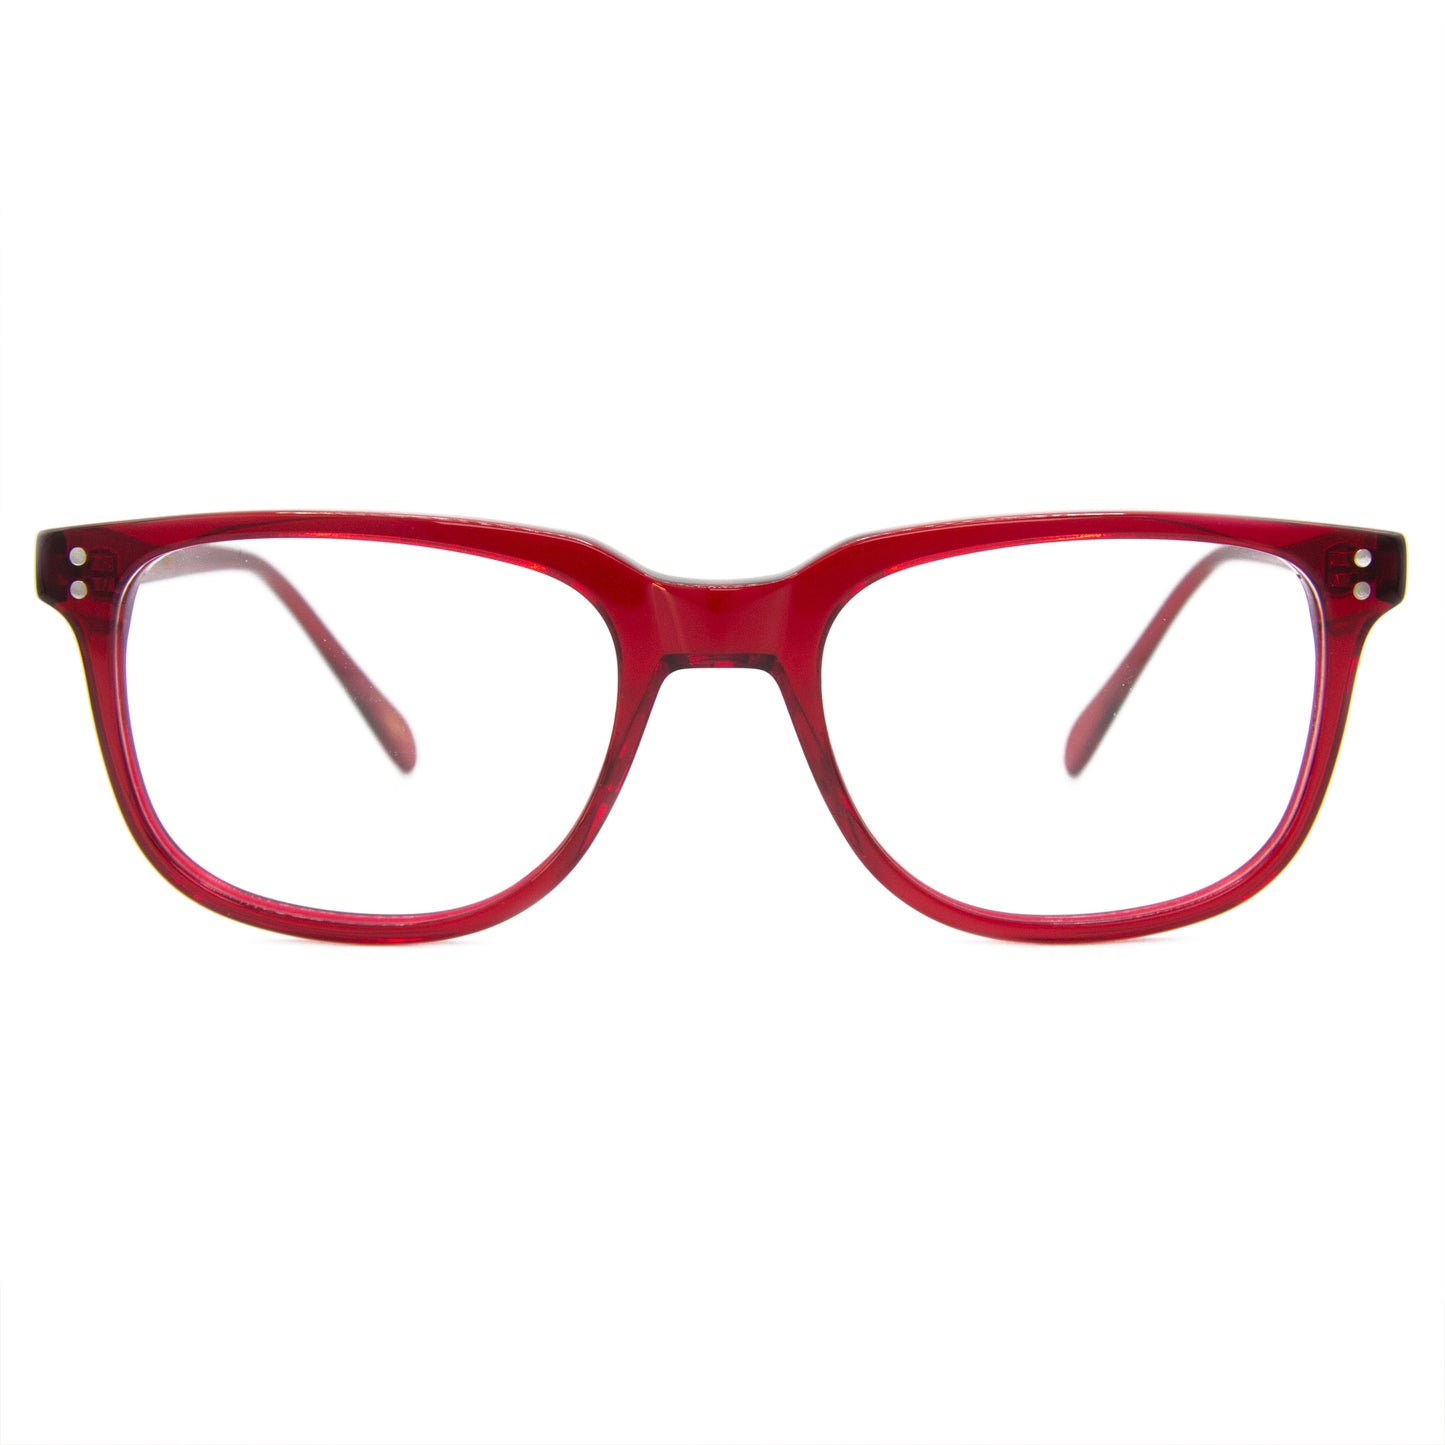 3 brothers - Theo - Red - Prescription Glasses